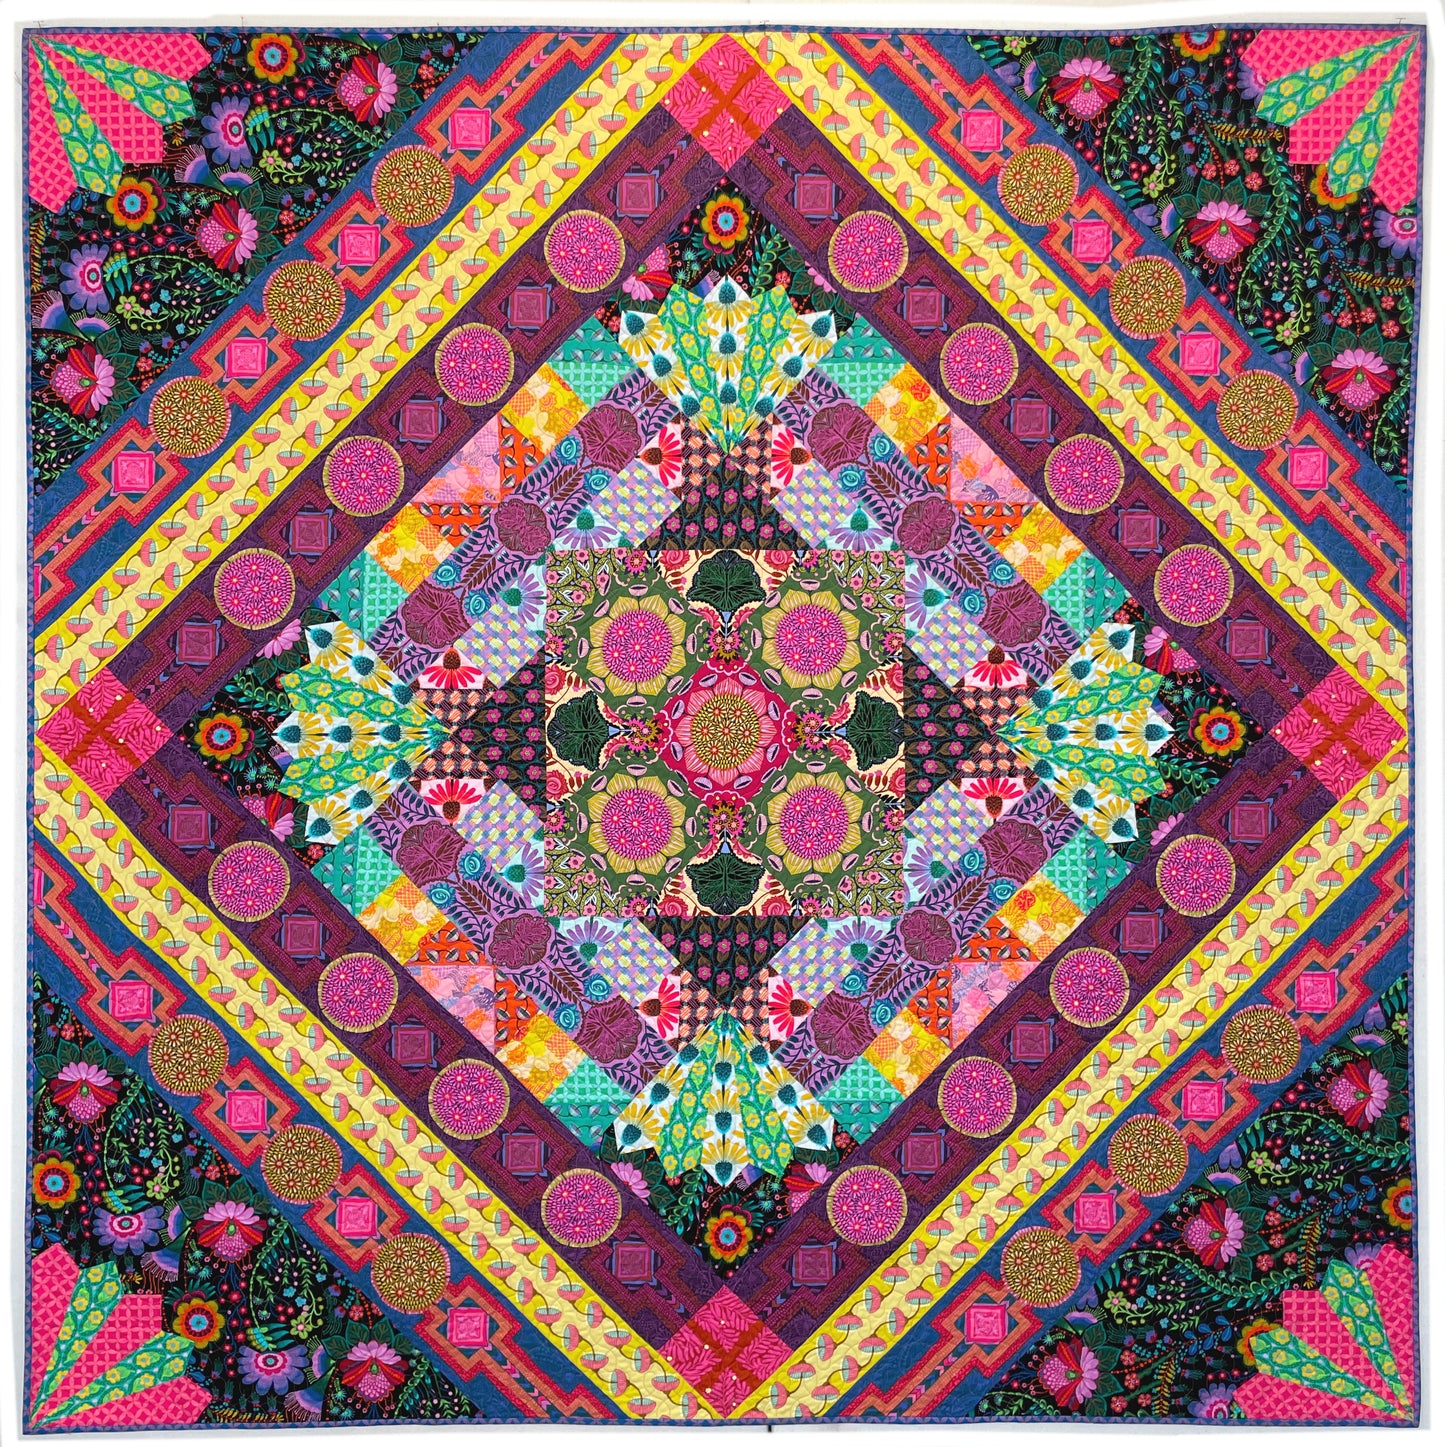 anna maaria brave quilt fabric available at 2 sew textiles art quilt supplies